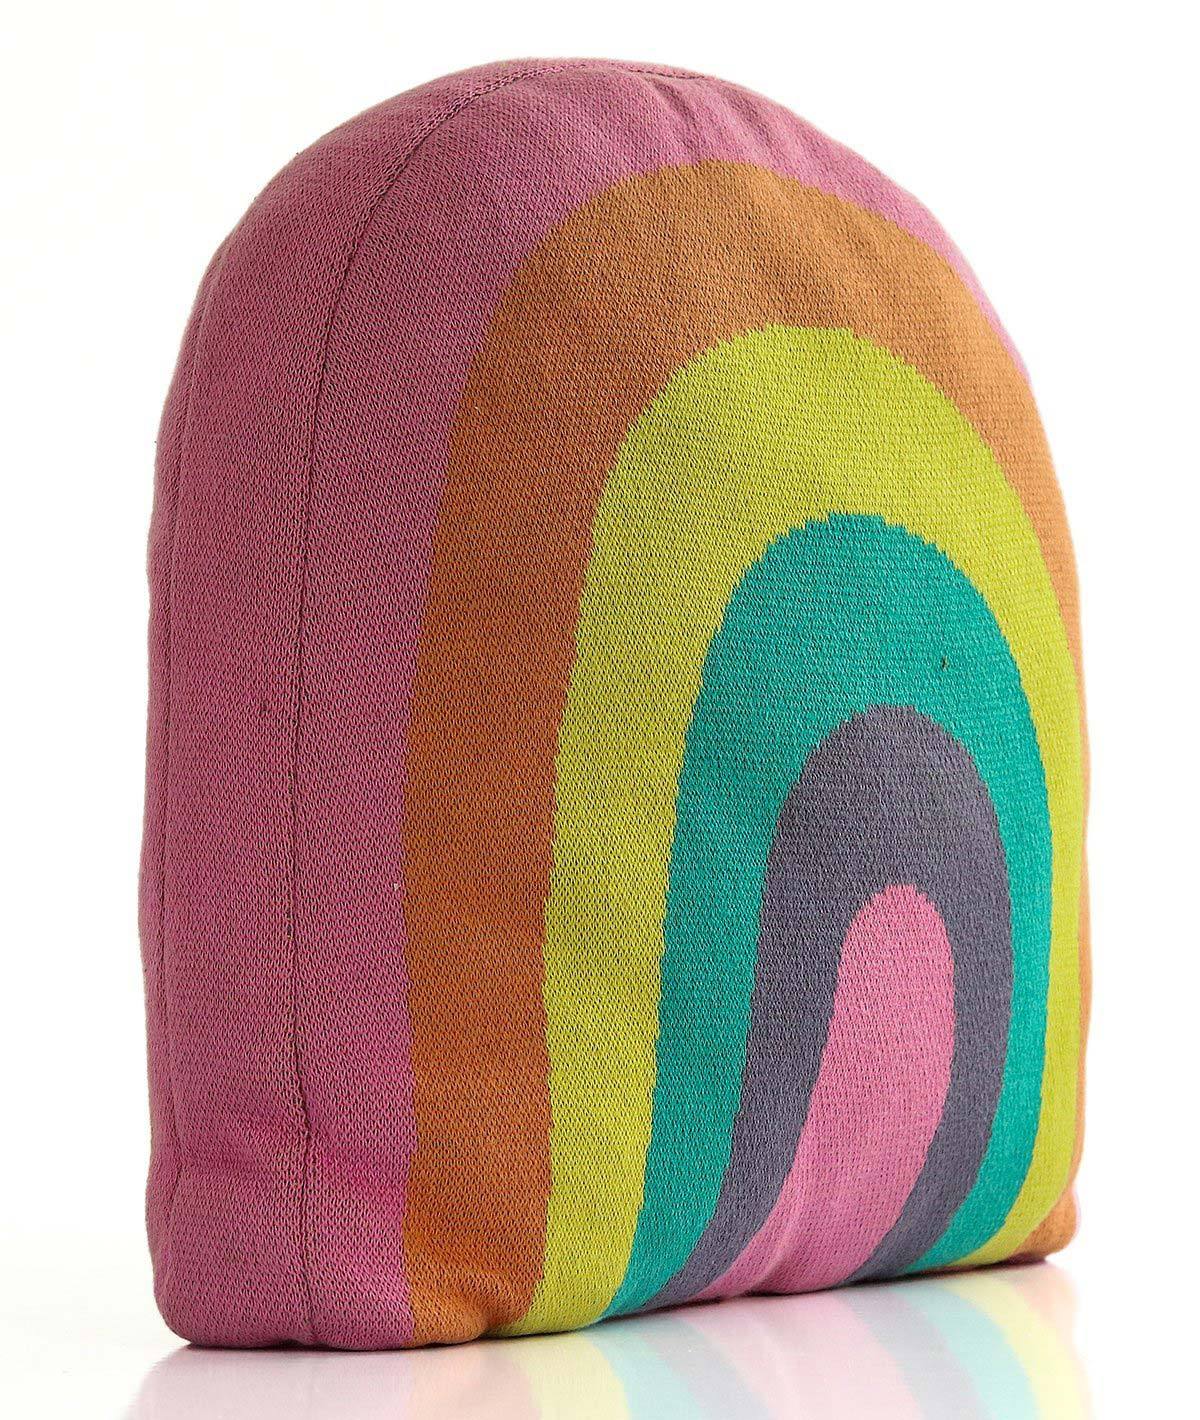 Rainbow Multi-Color Cotton Cushion / Pillow for Baby / Kids